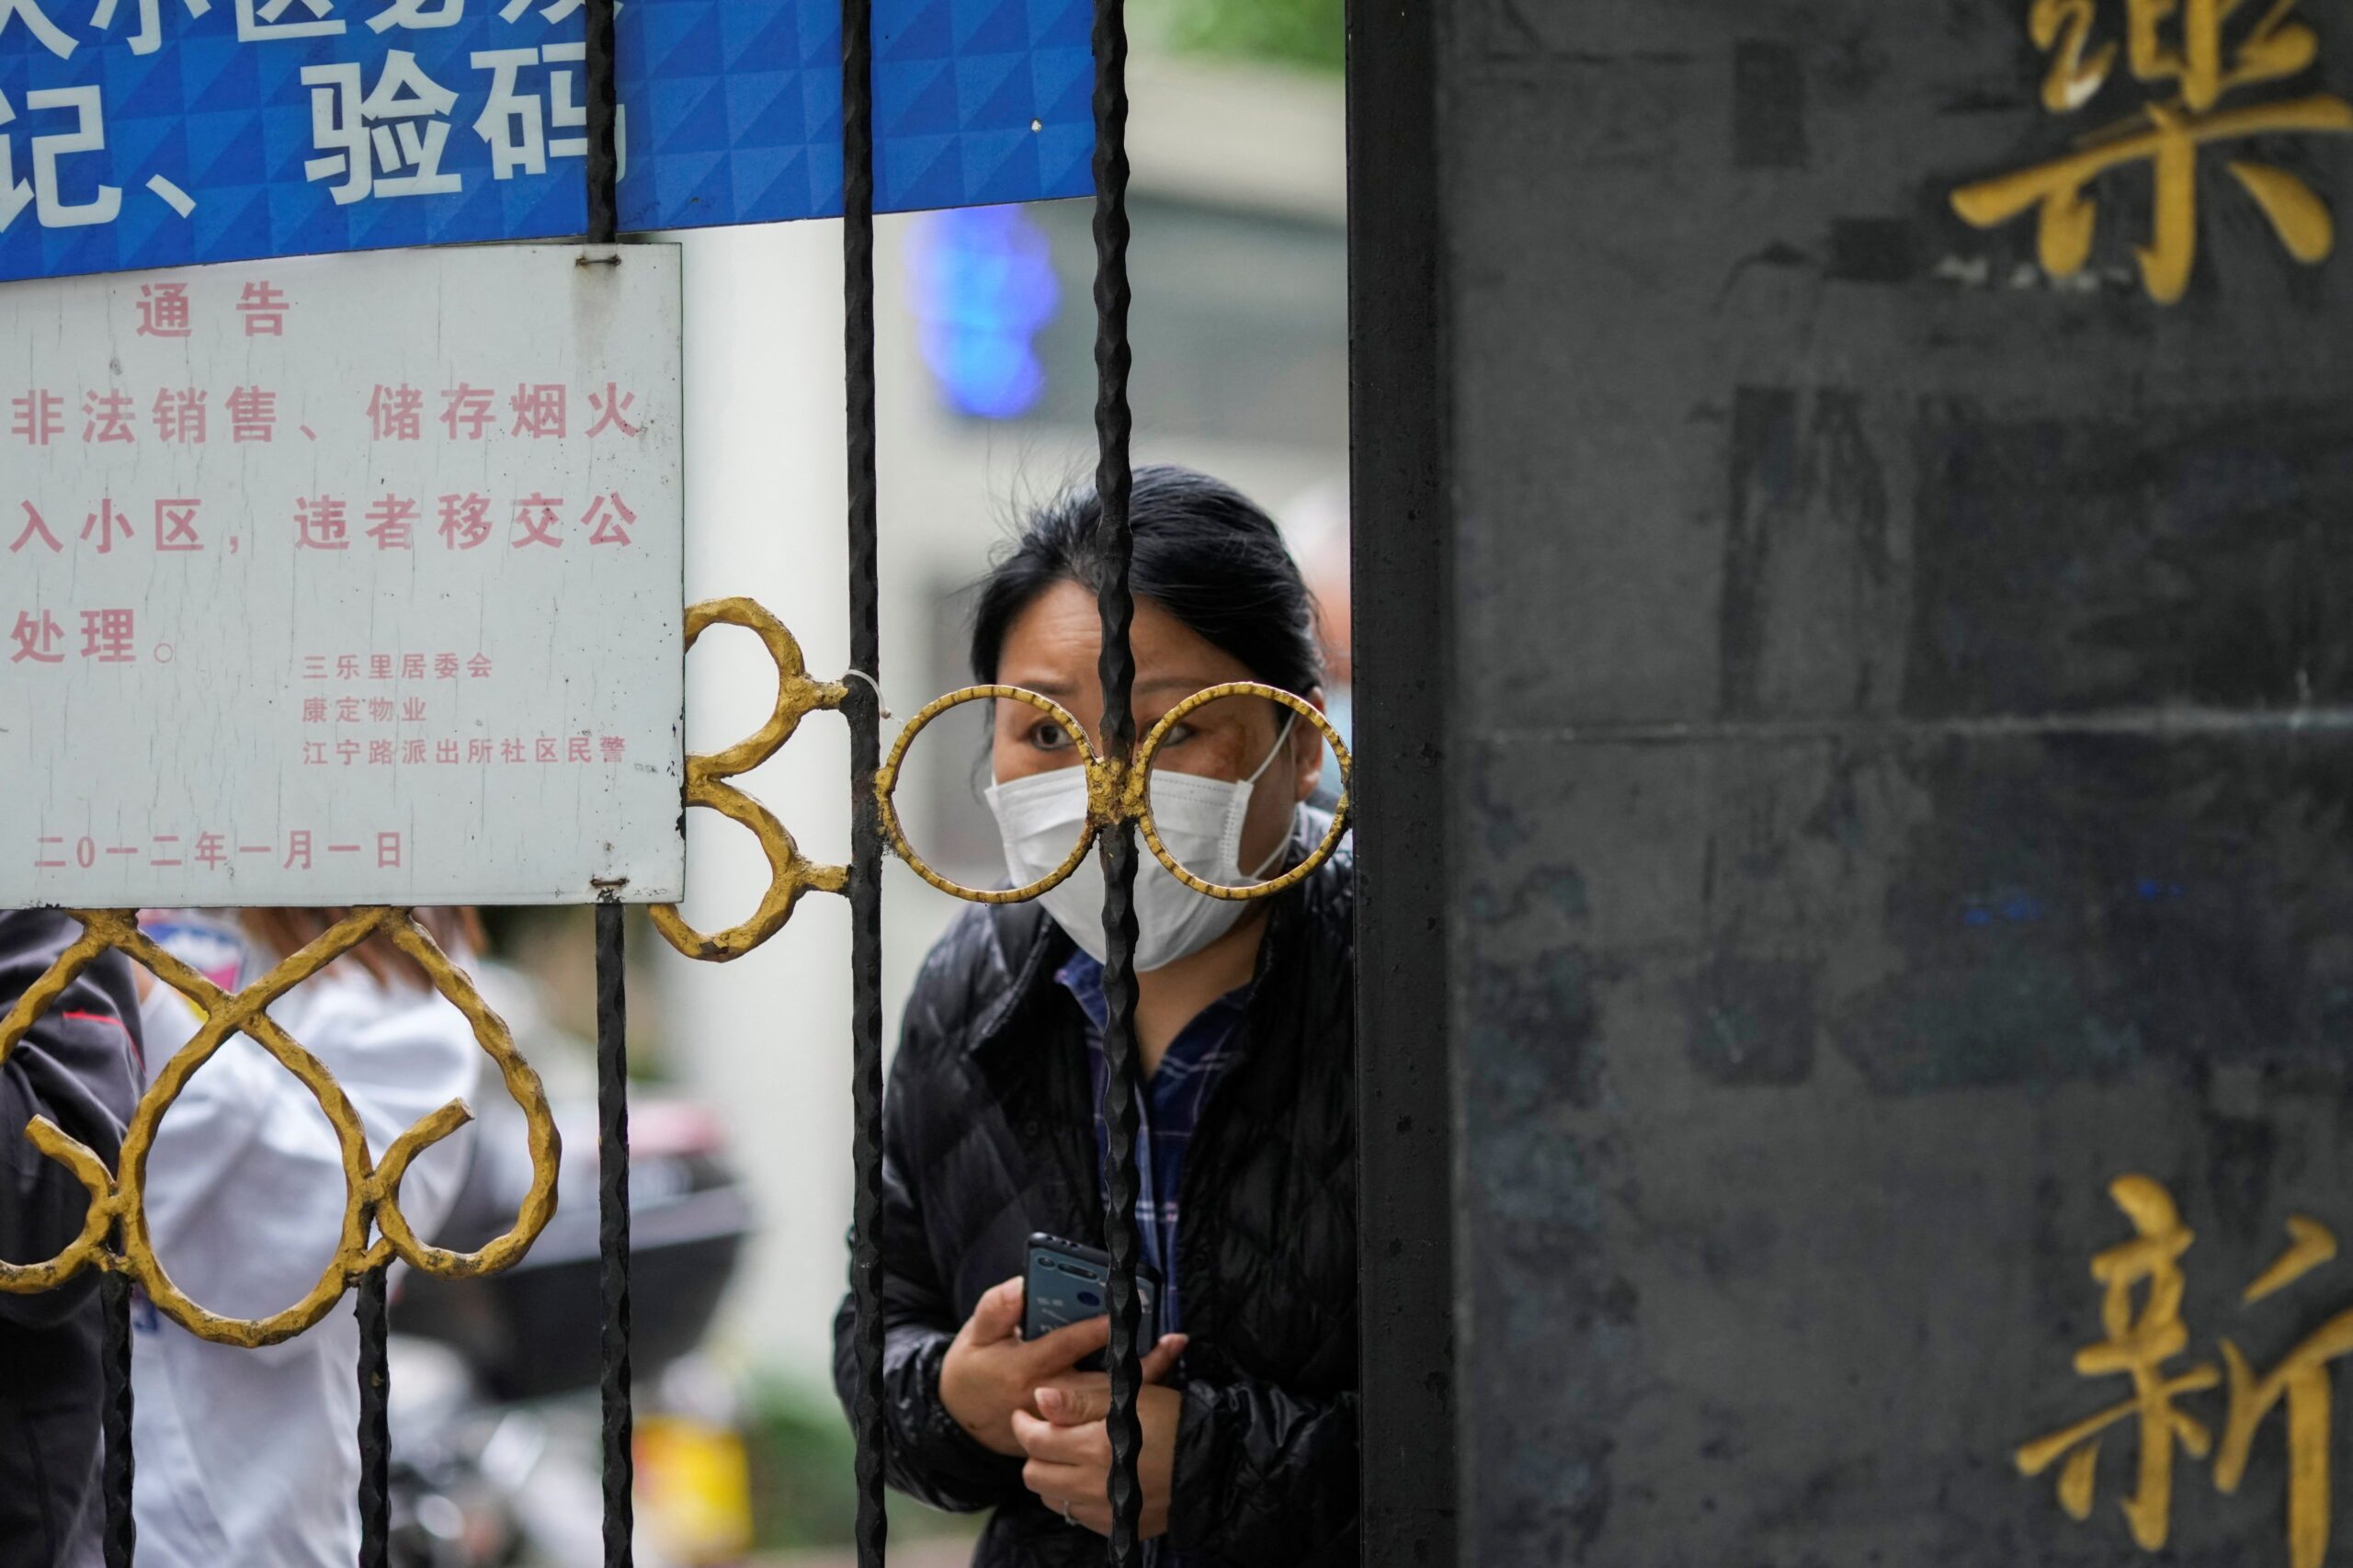 Shanghai warns COVID-19 lockdown violators will be punished as cases hit 25,000